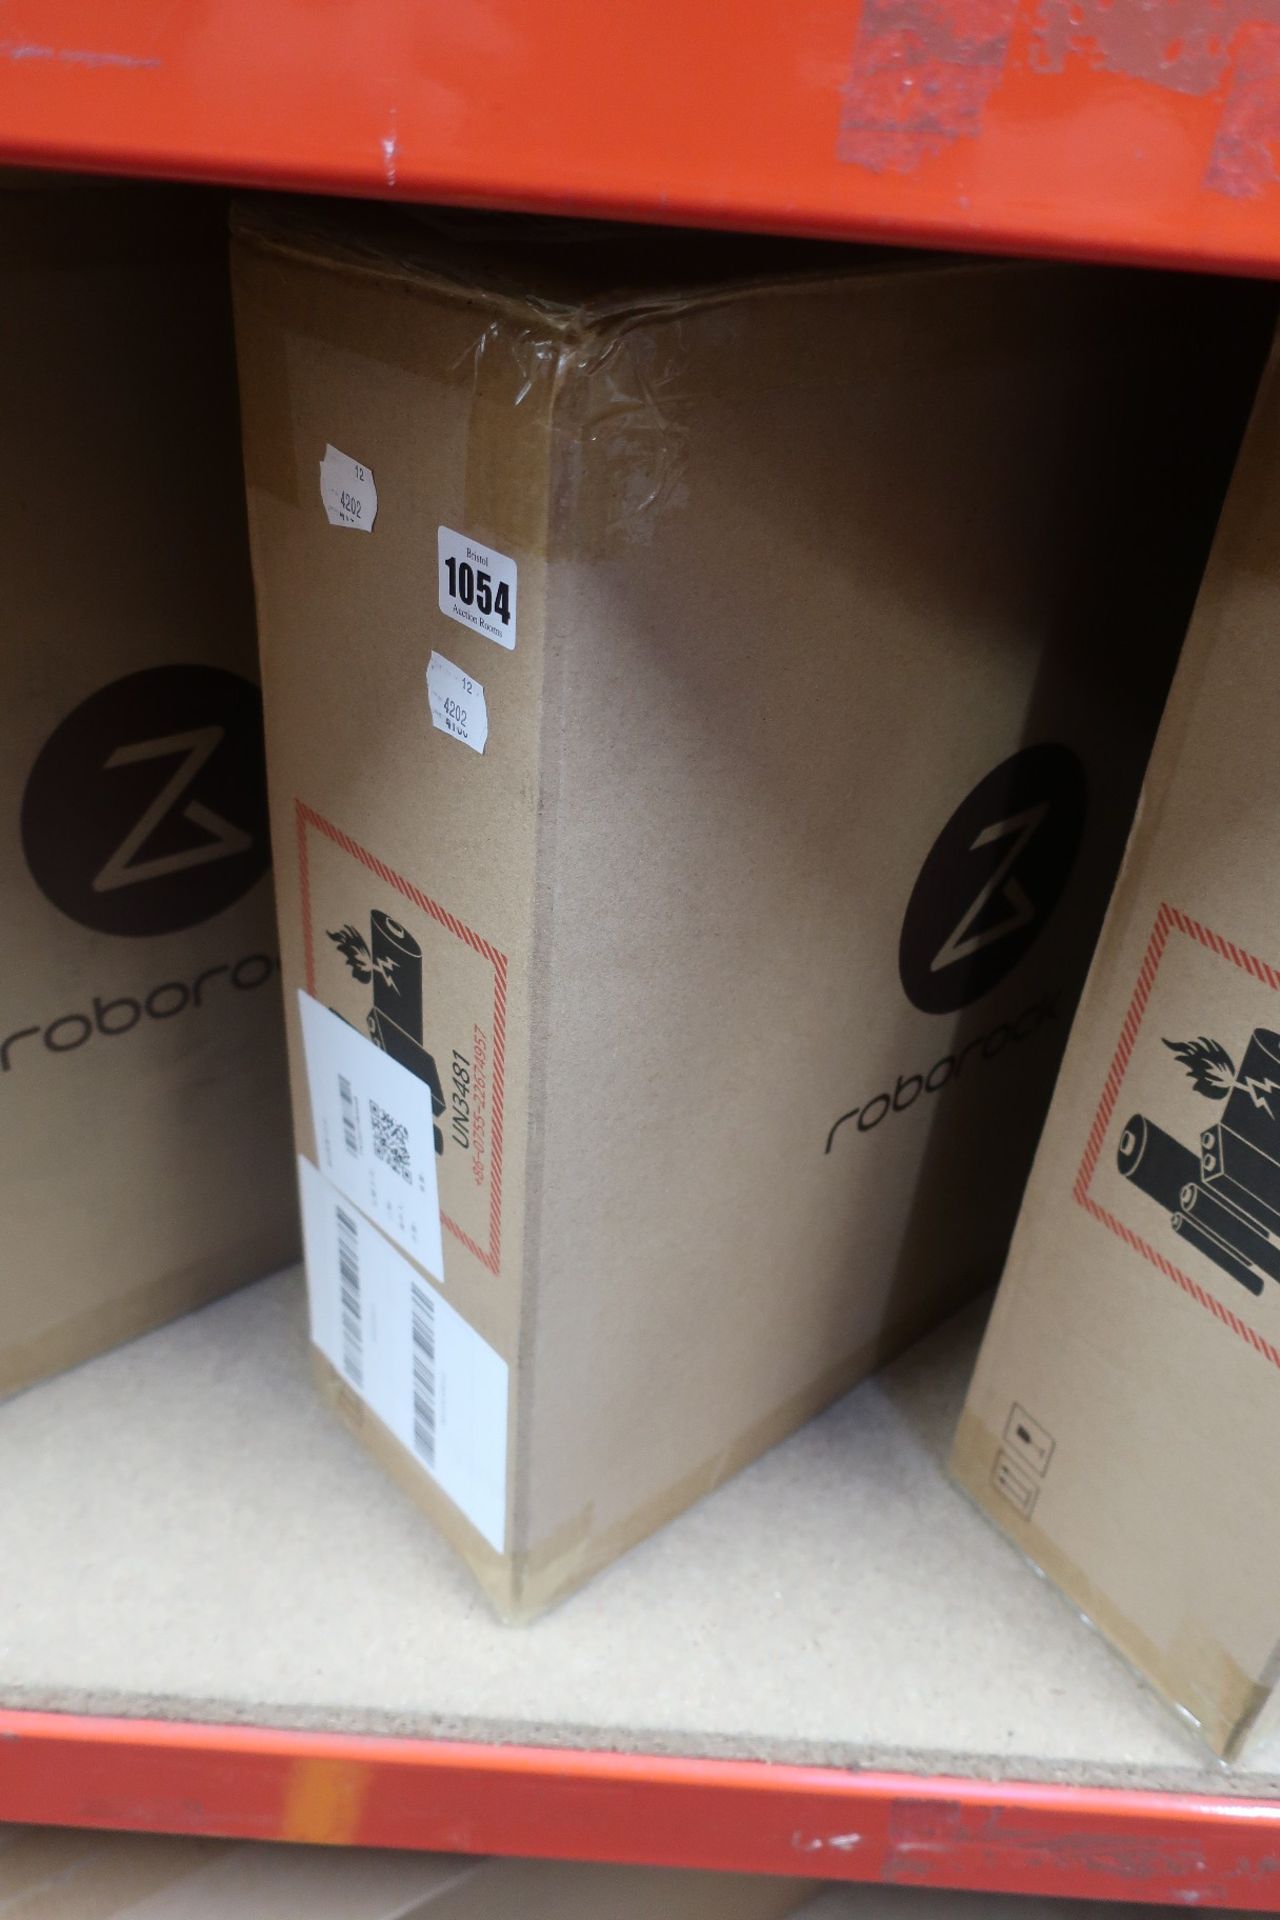 A boxed as new Roborock S502 robotic vacuum cleaner